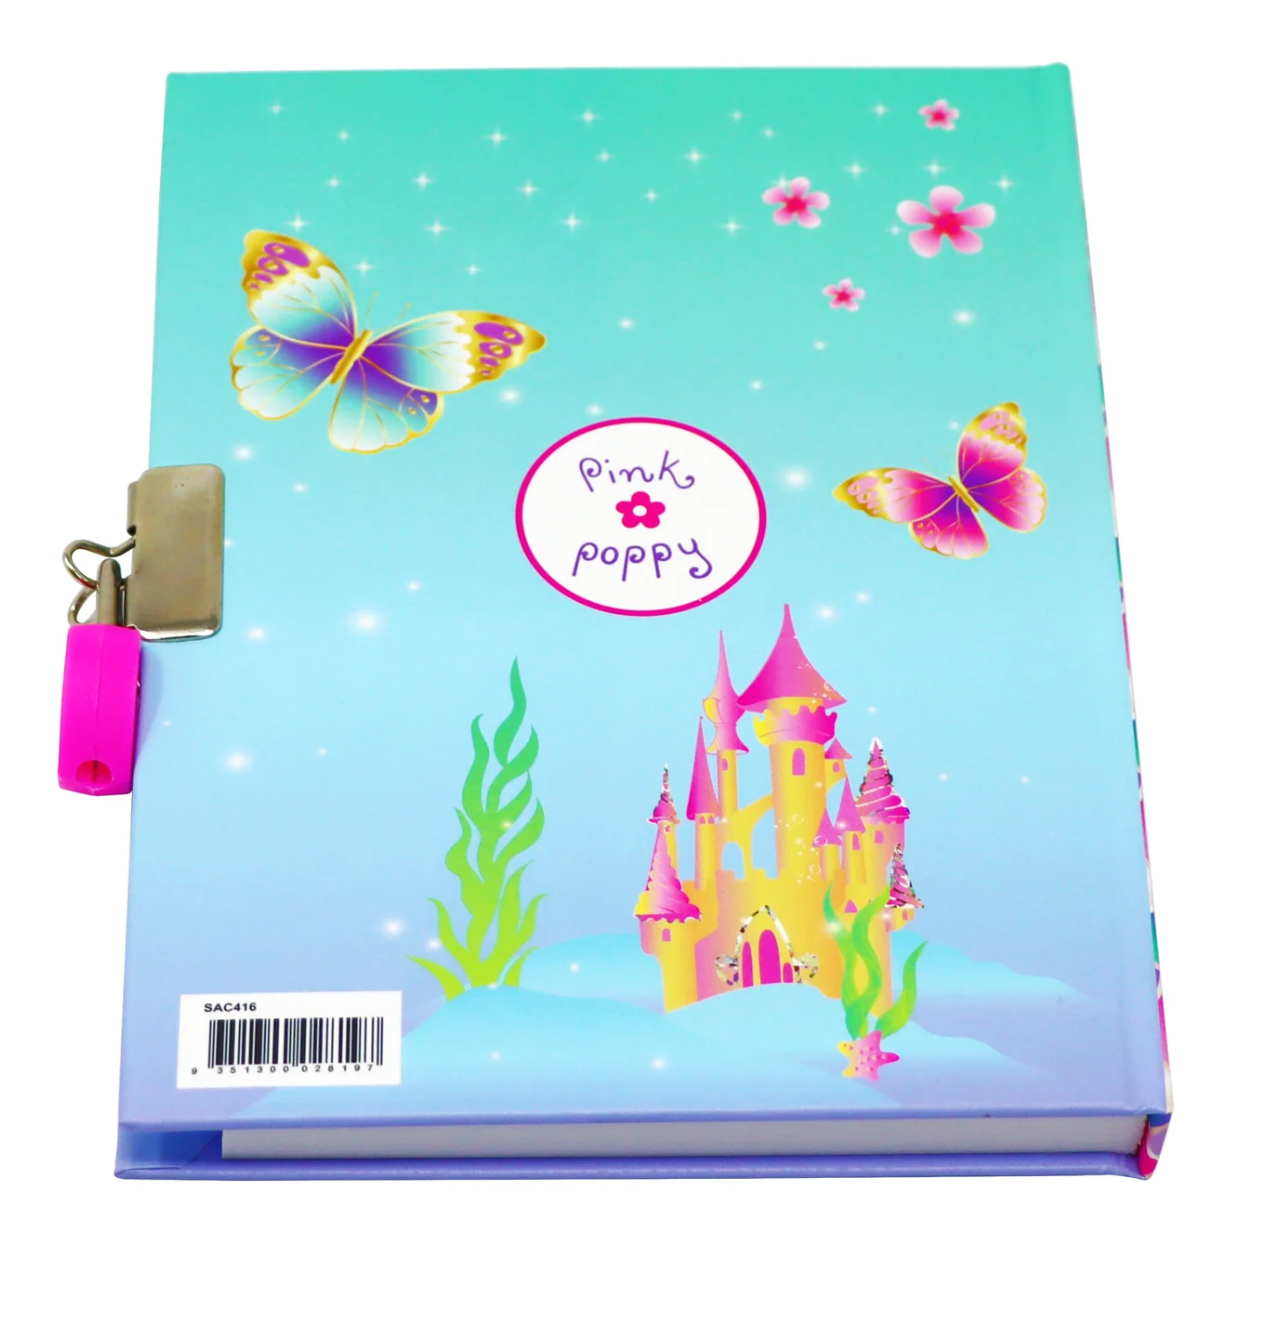 Shimmering Mermaid Strawberry Scented Lockable Diary